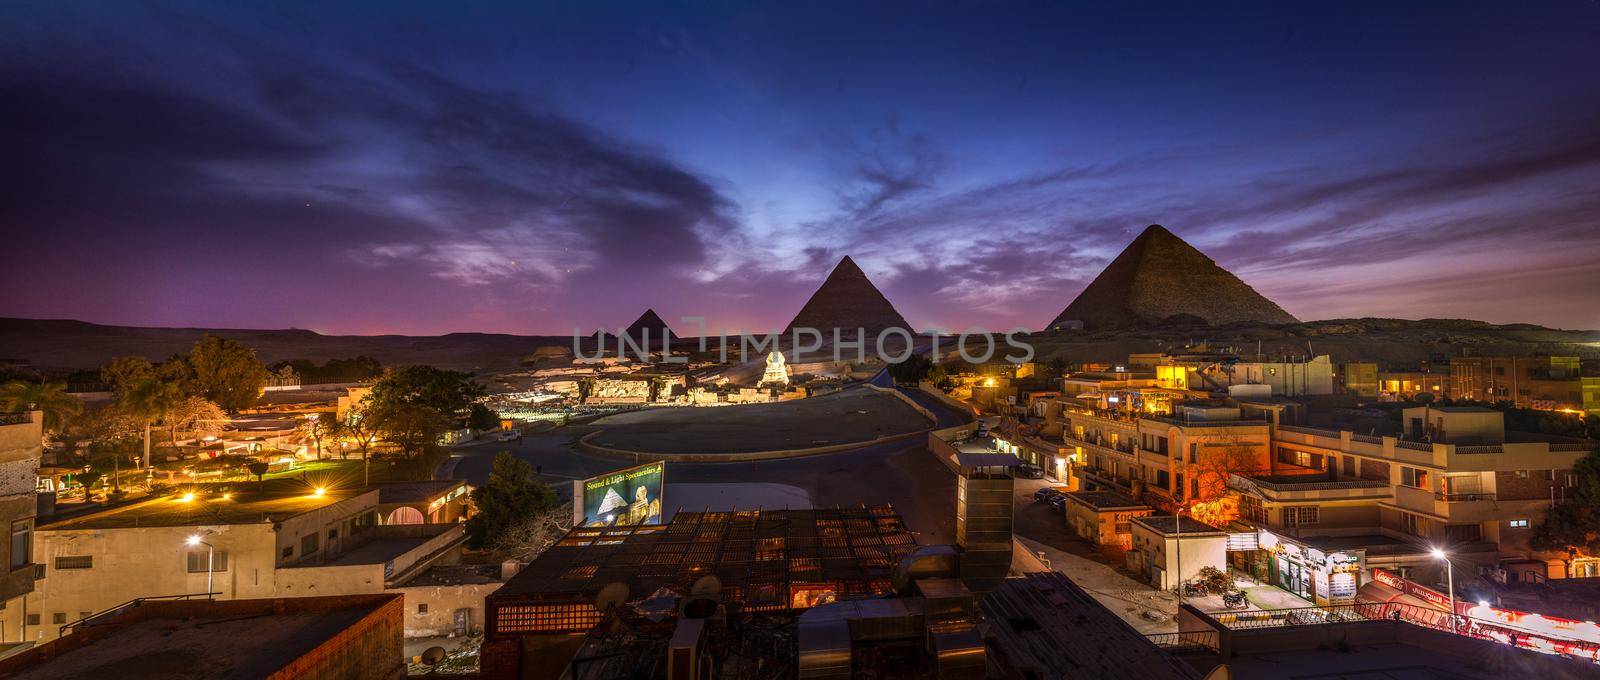 Sphinx in the night lights by Givaga